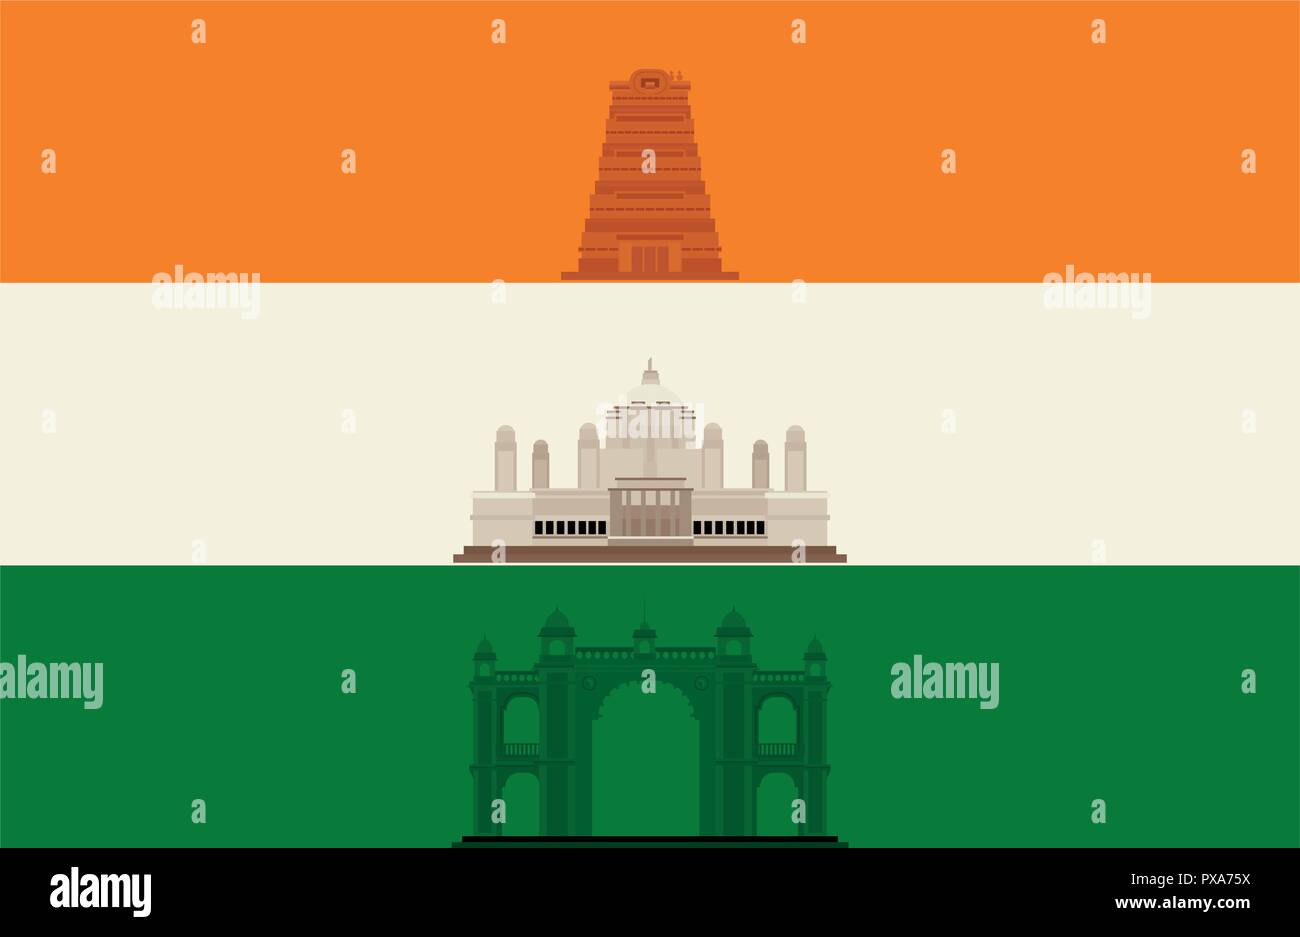 flag indian and monuments ladnmark vector illustration  Stock Vector